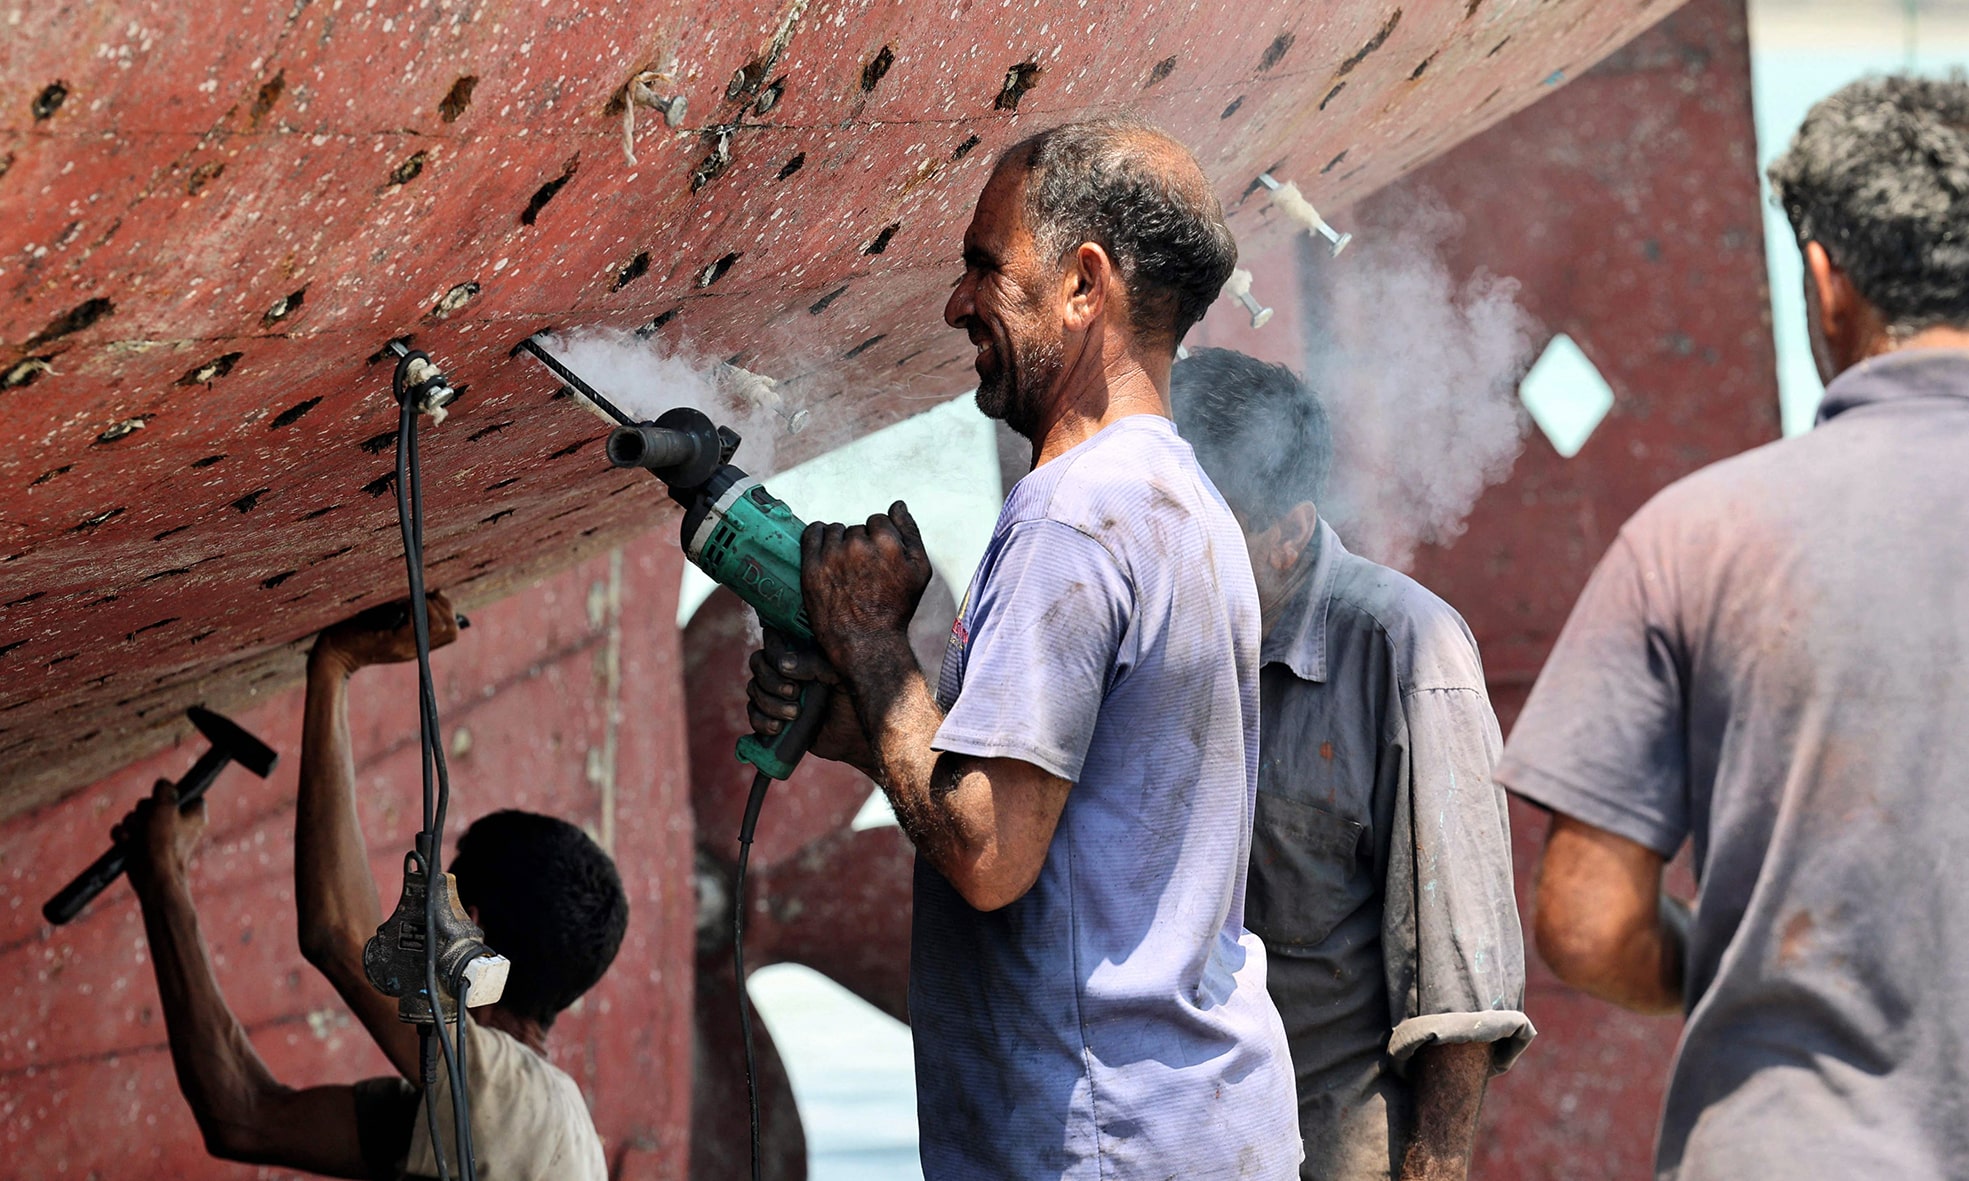 Workers restore a traditional wooden ship (lenj) in a shipyard.